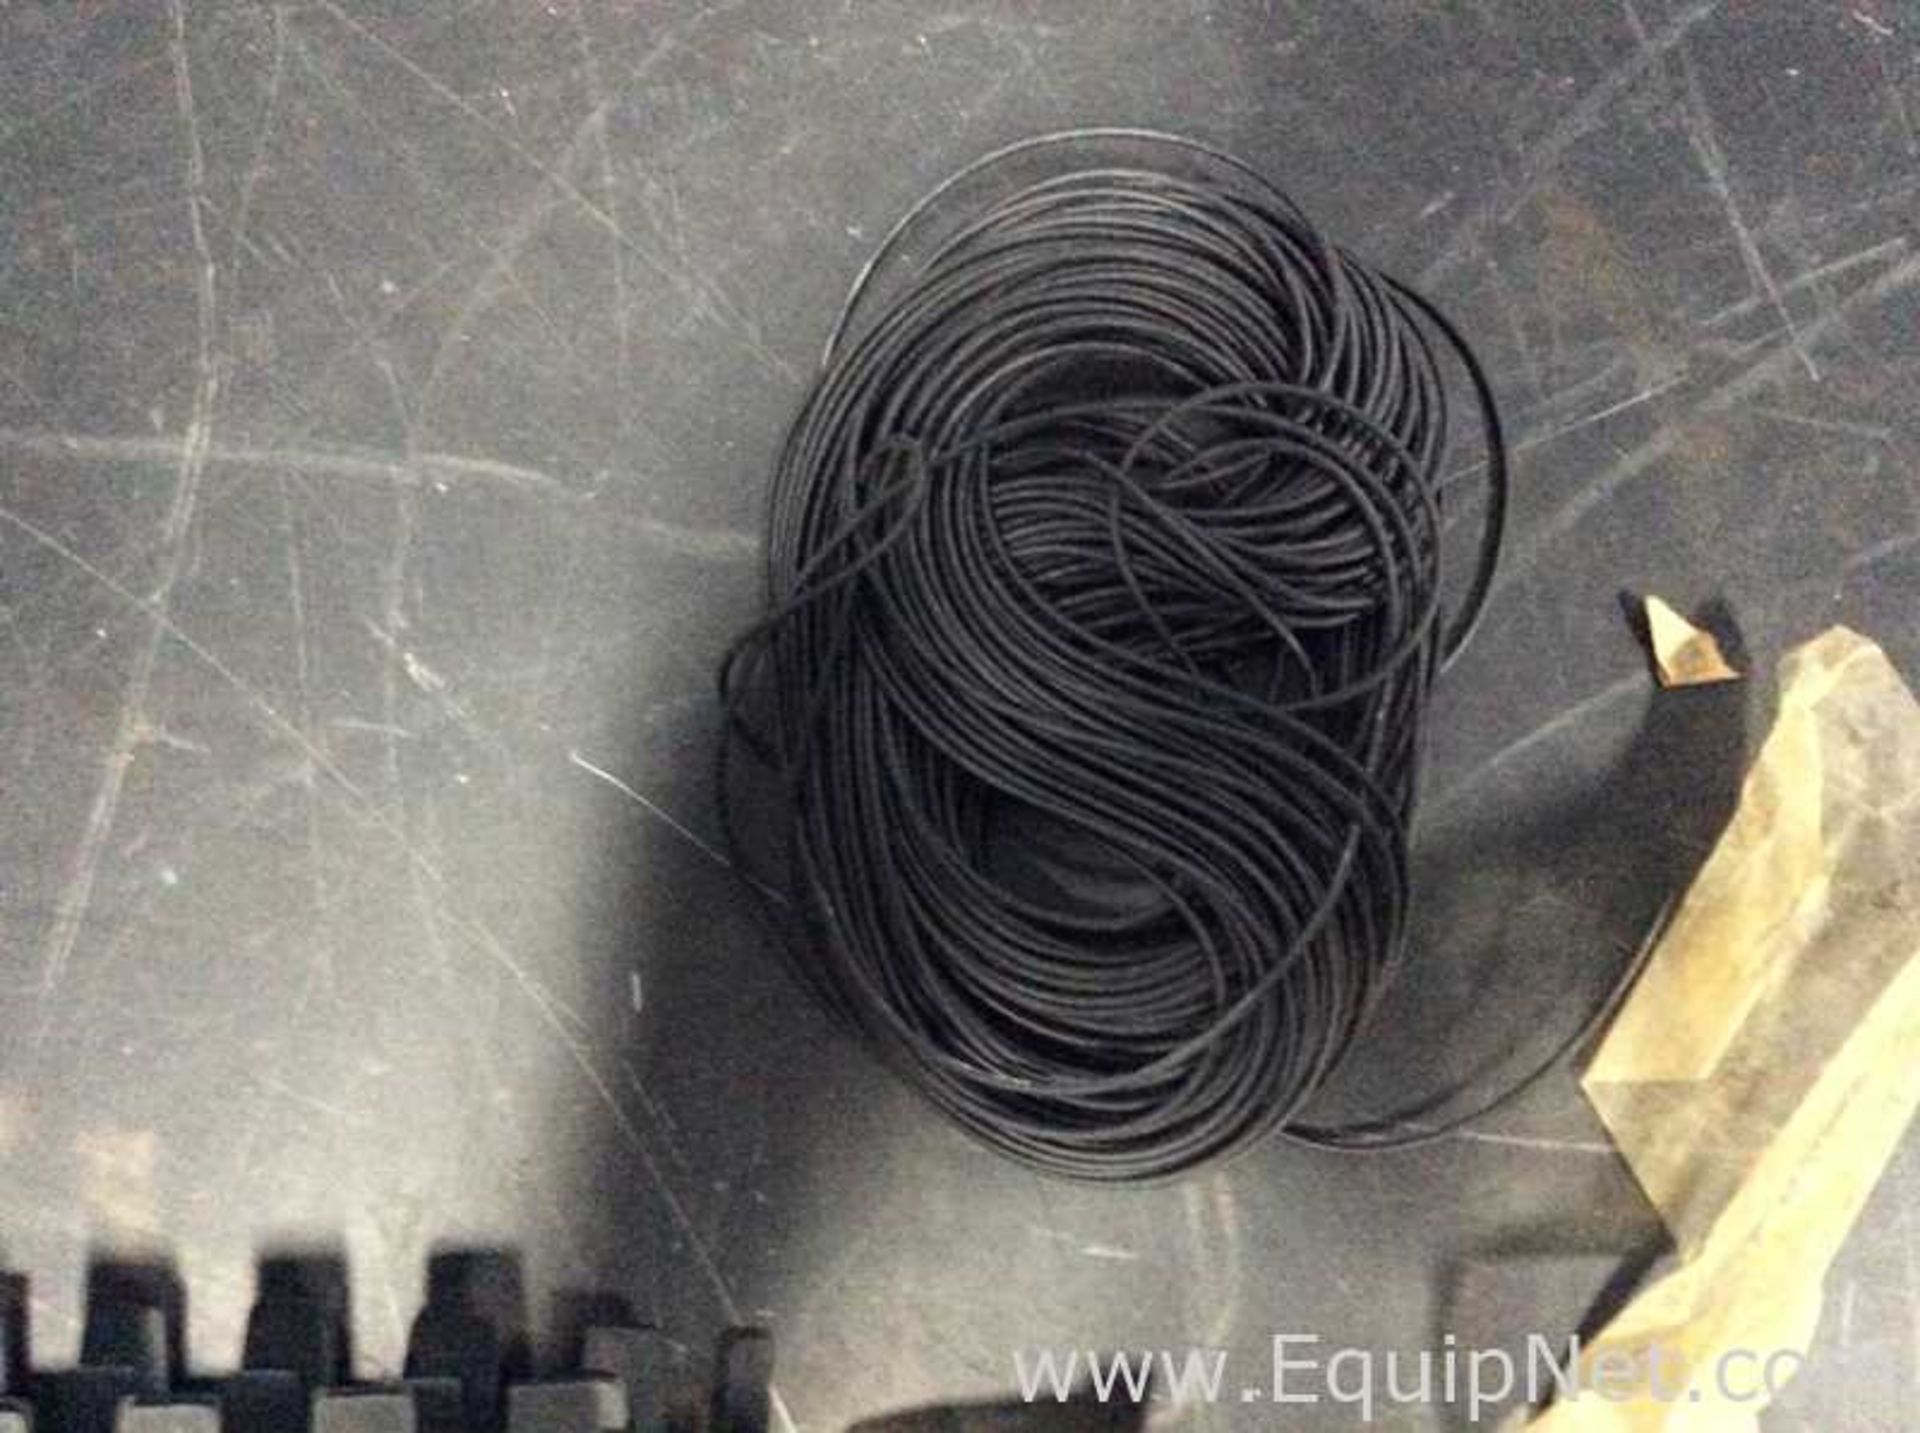 Lot of Various Sized Solid Rubber Lines and Tiles - Image 4 of 7